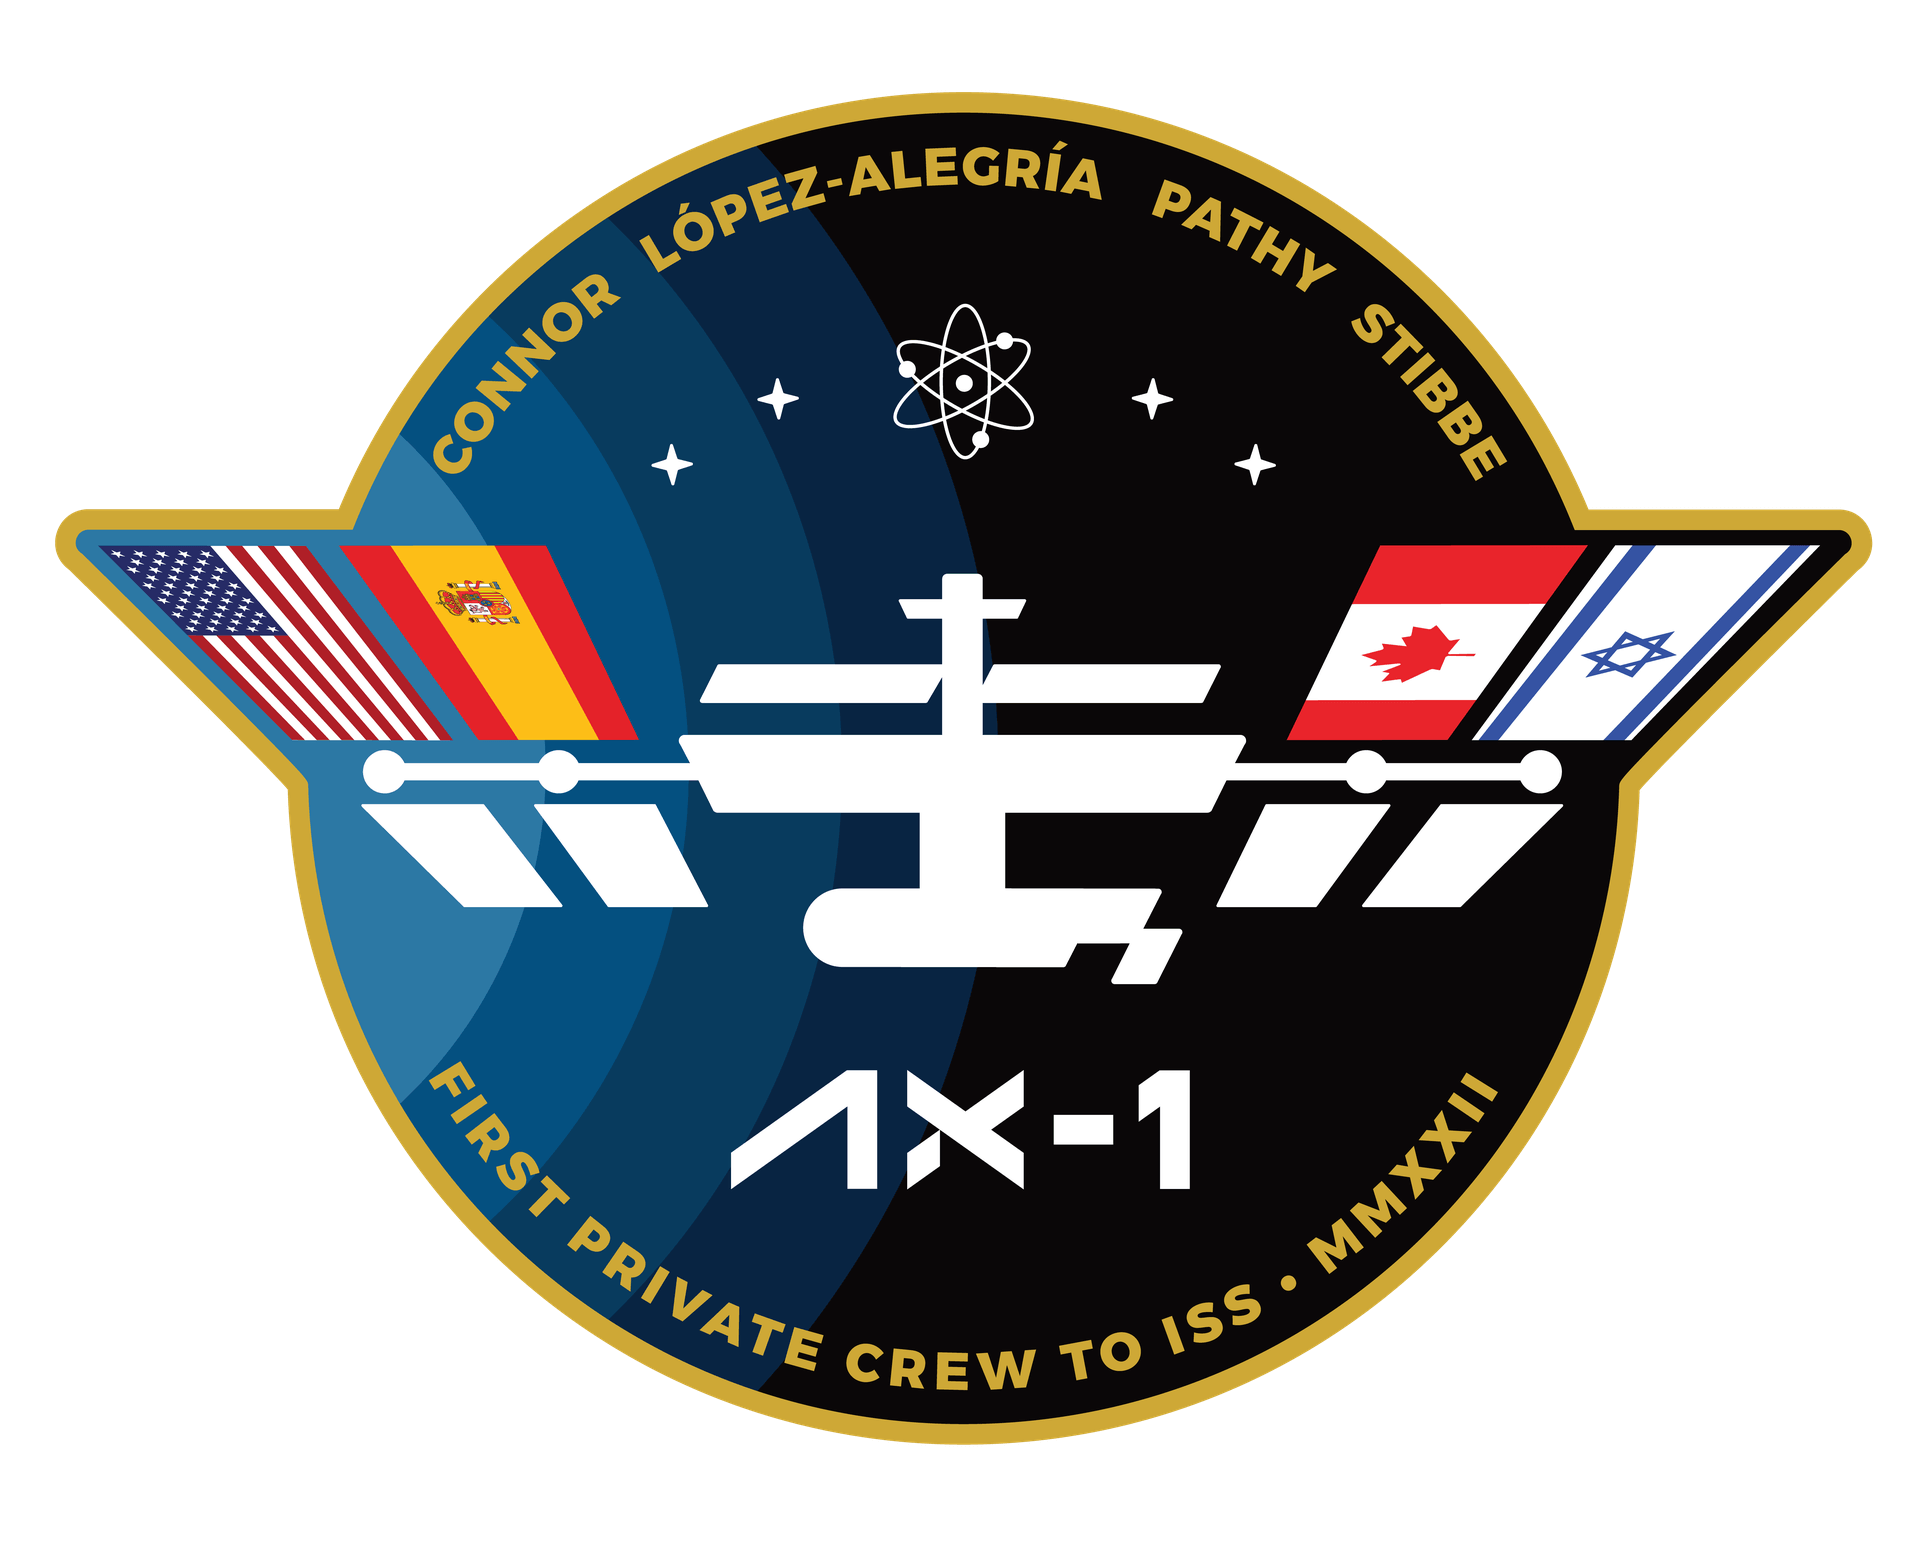 Mission patch for Axiom Space Mission 1